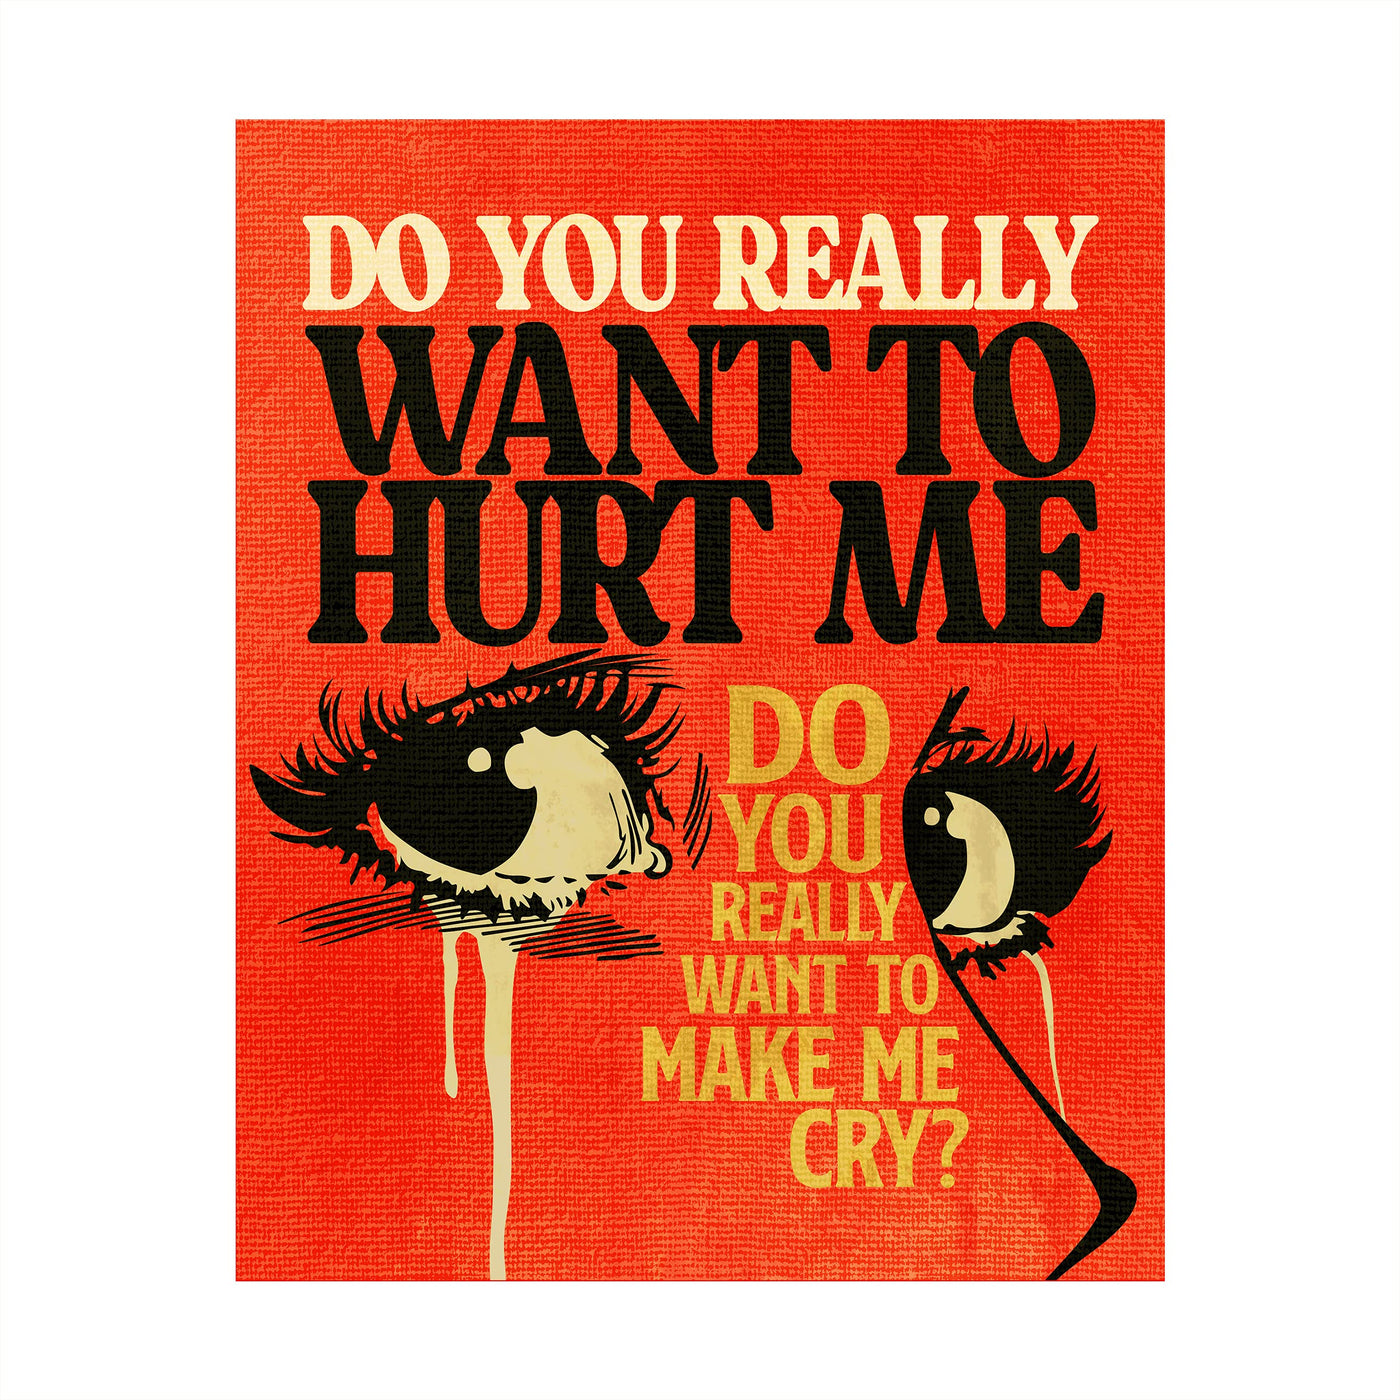 Do You Really Want To Hurt Me-Song Lyrics Wall Art -8 x 10" Typographic Word Art Print-Ready to Frame. Retro Home-Office-Studio Decor. Perfect Gift for Culture Club Band & All Pop-Rock Music Fans!